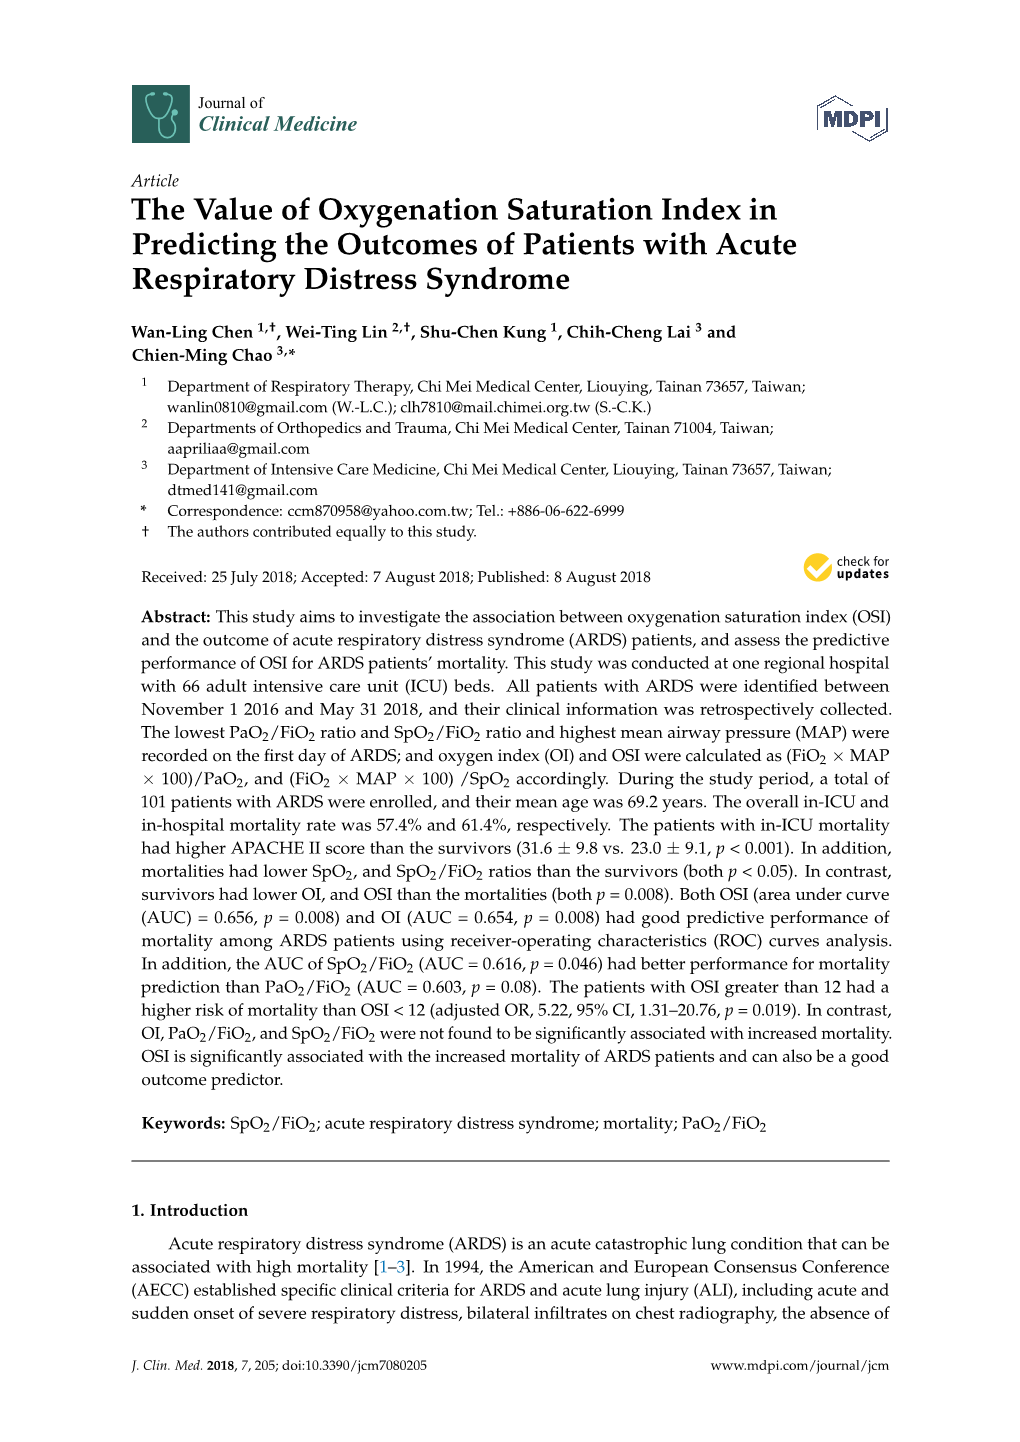 The Value of Oxygenation Saturation Index in Predicting the Outcomes of Patients with Acute Respiratory Distress Syndrome